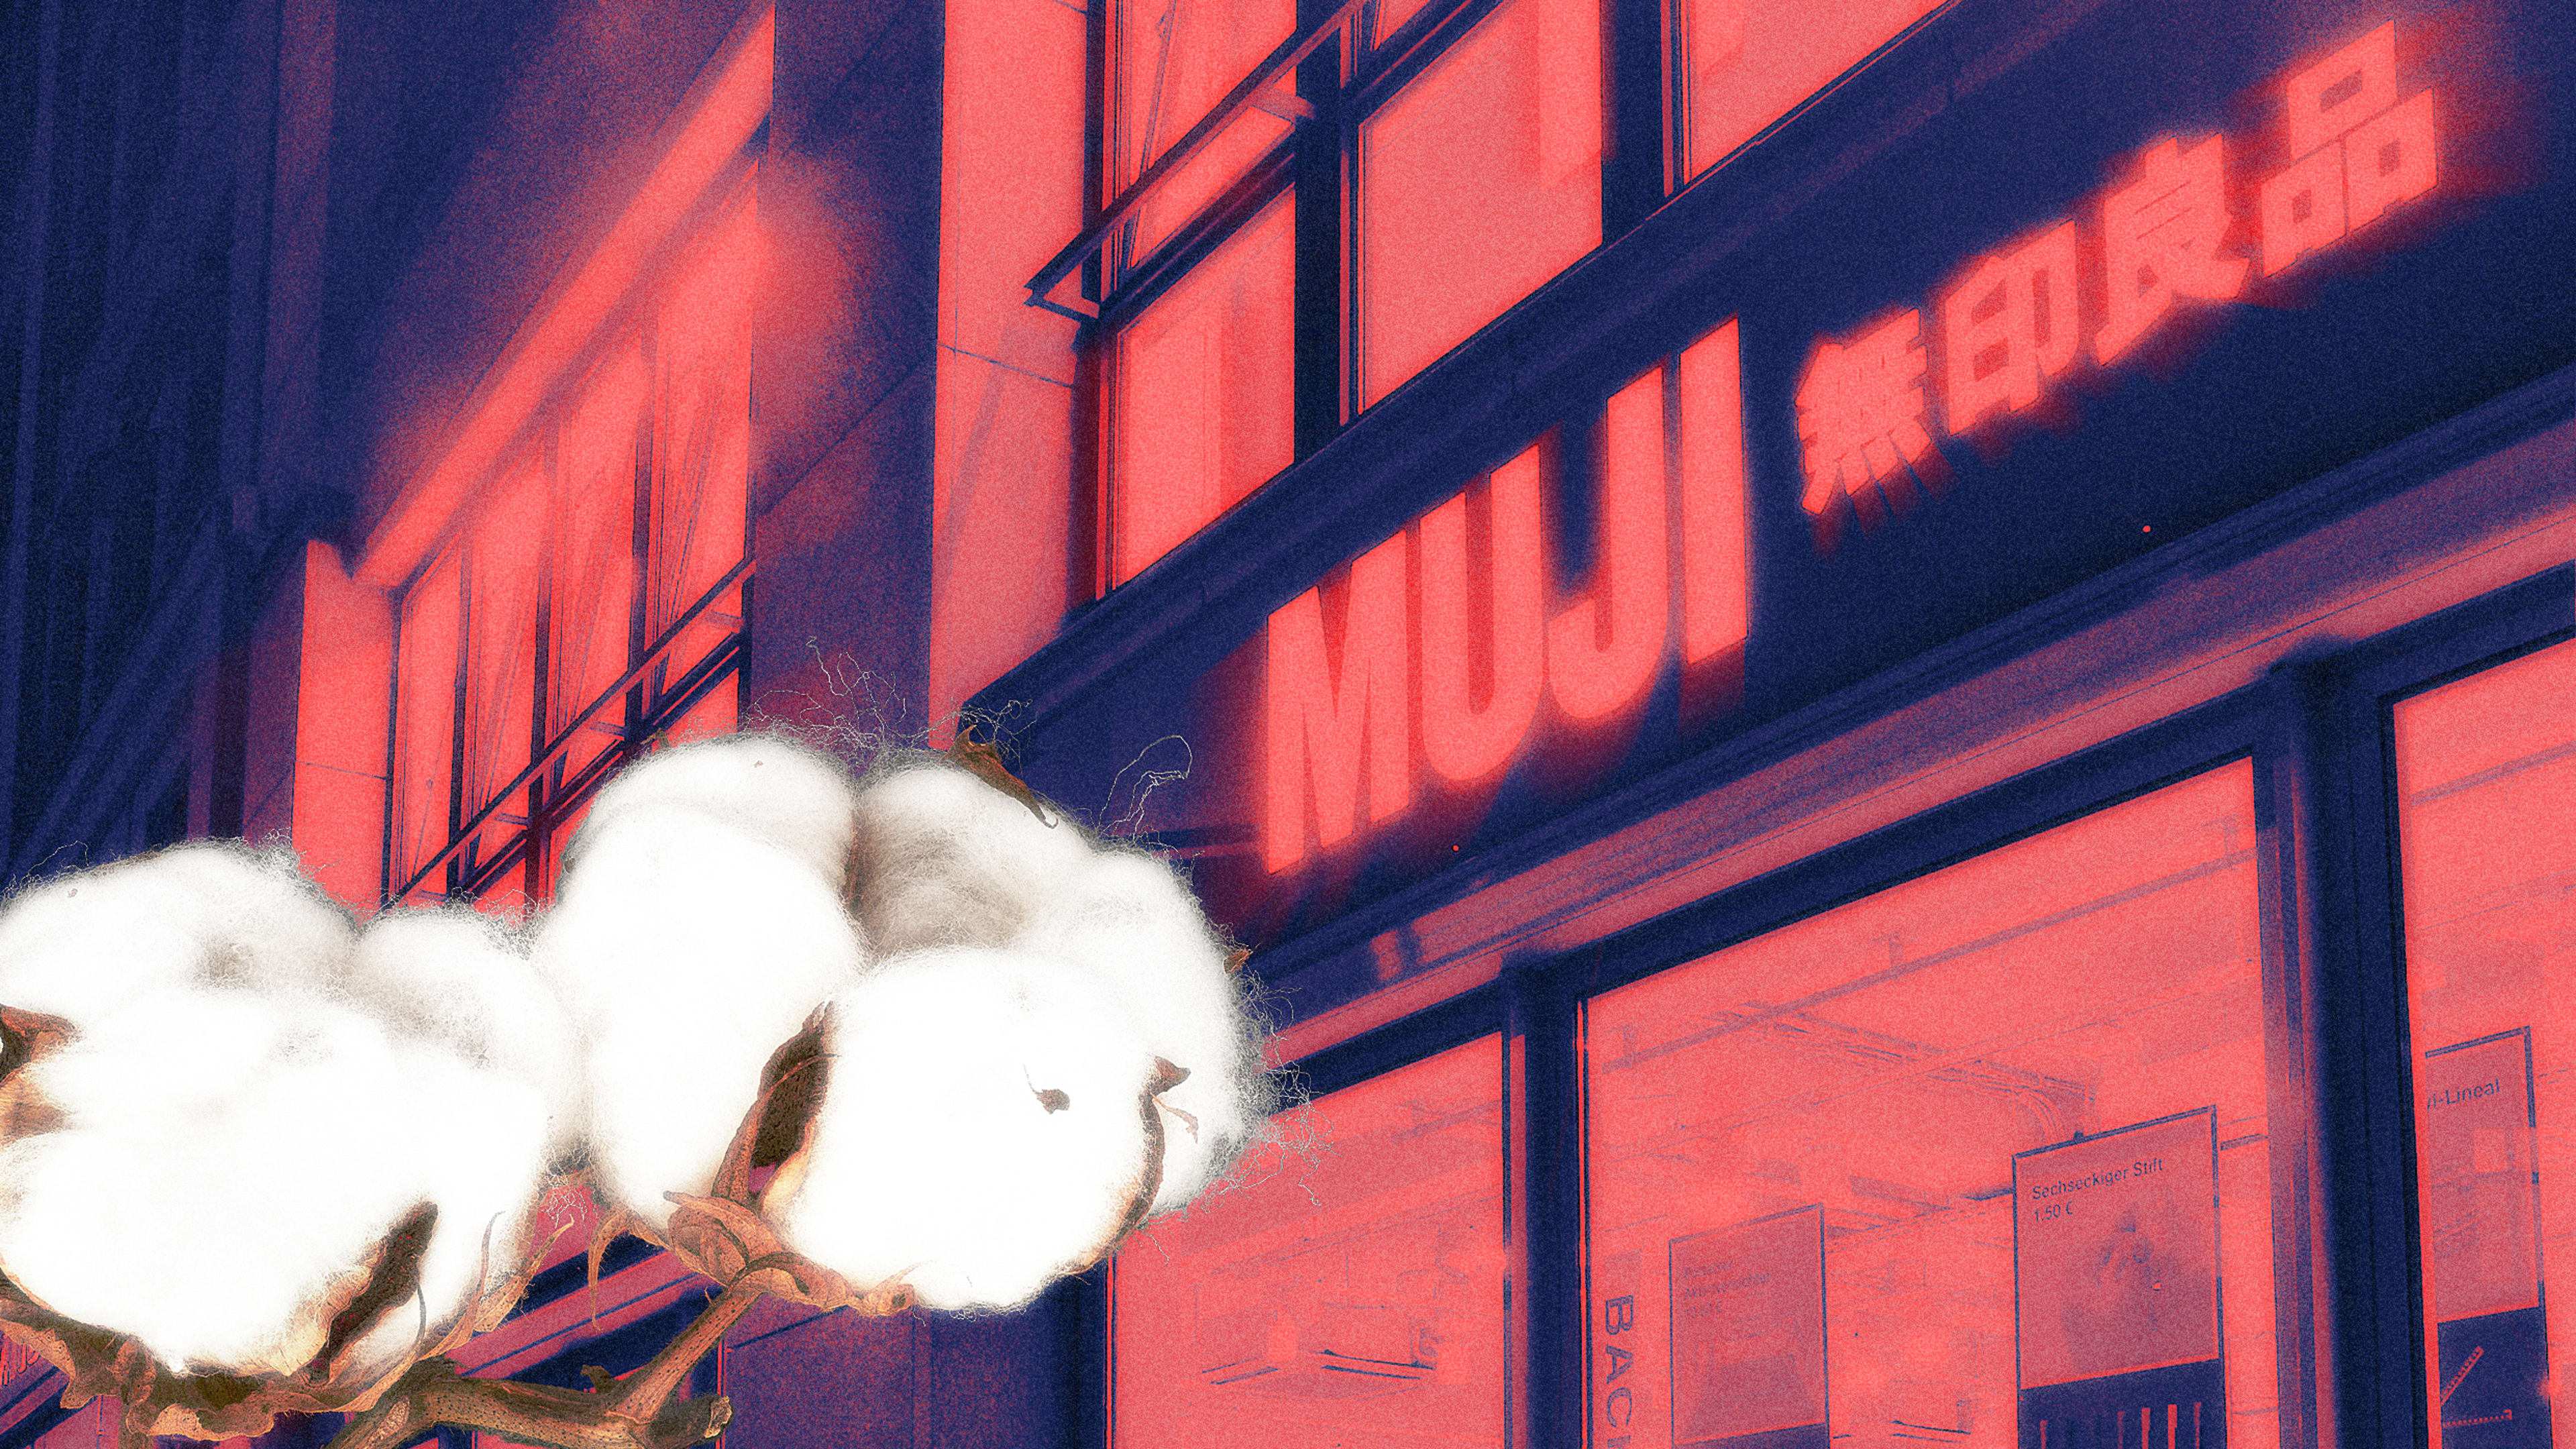 Muji is a beloved Japanese housewares brand.  Why is it advertising its ties to forced labor?